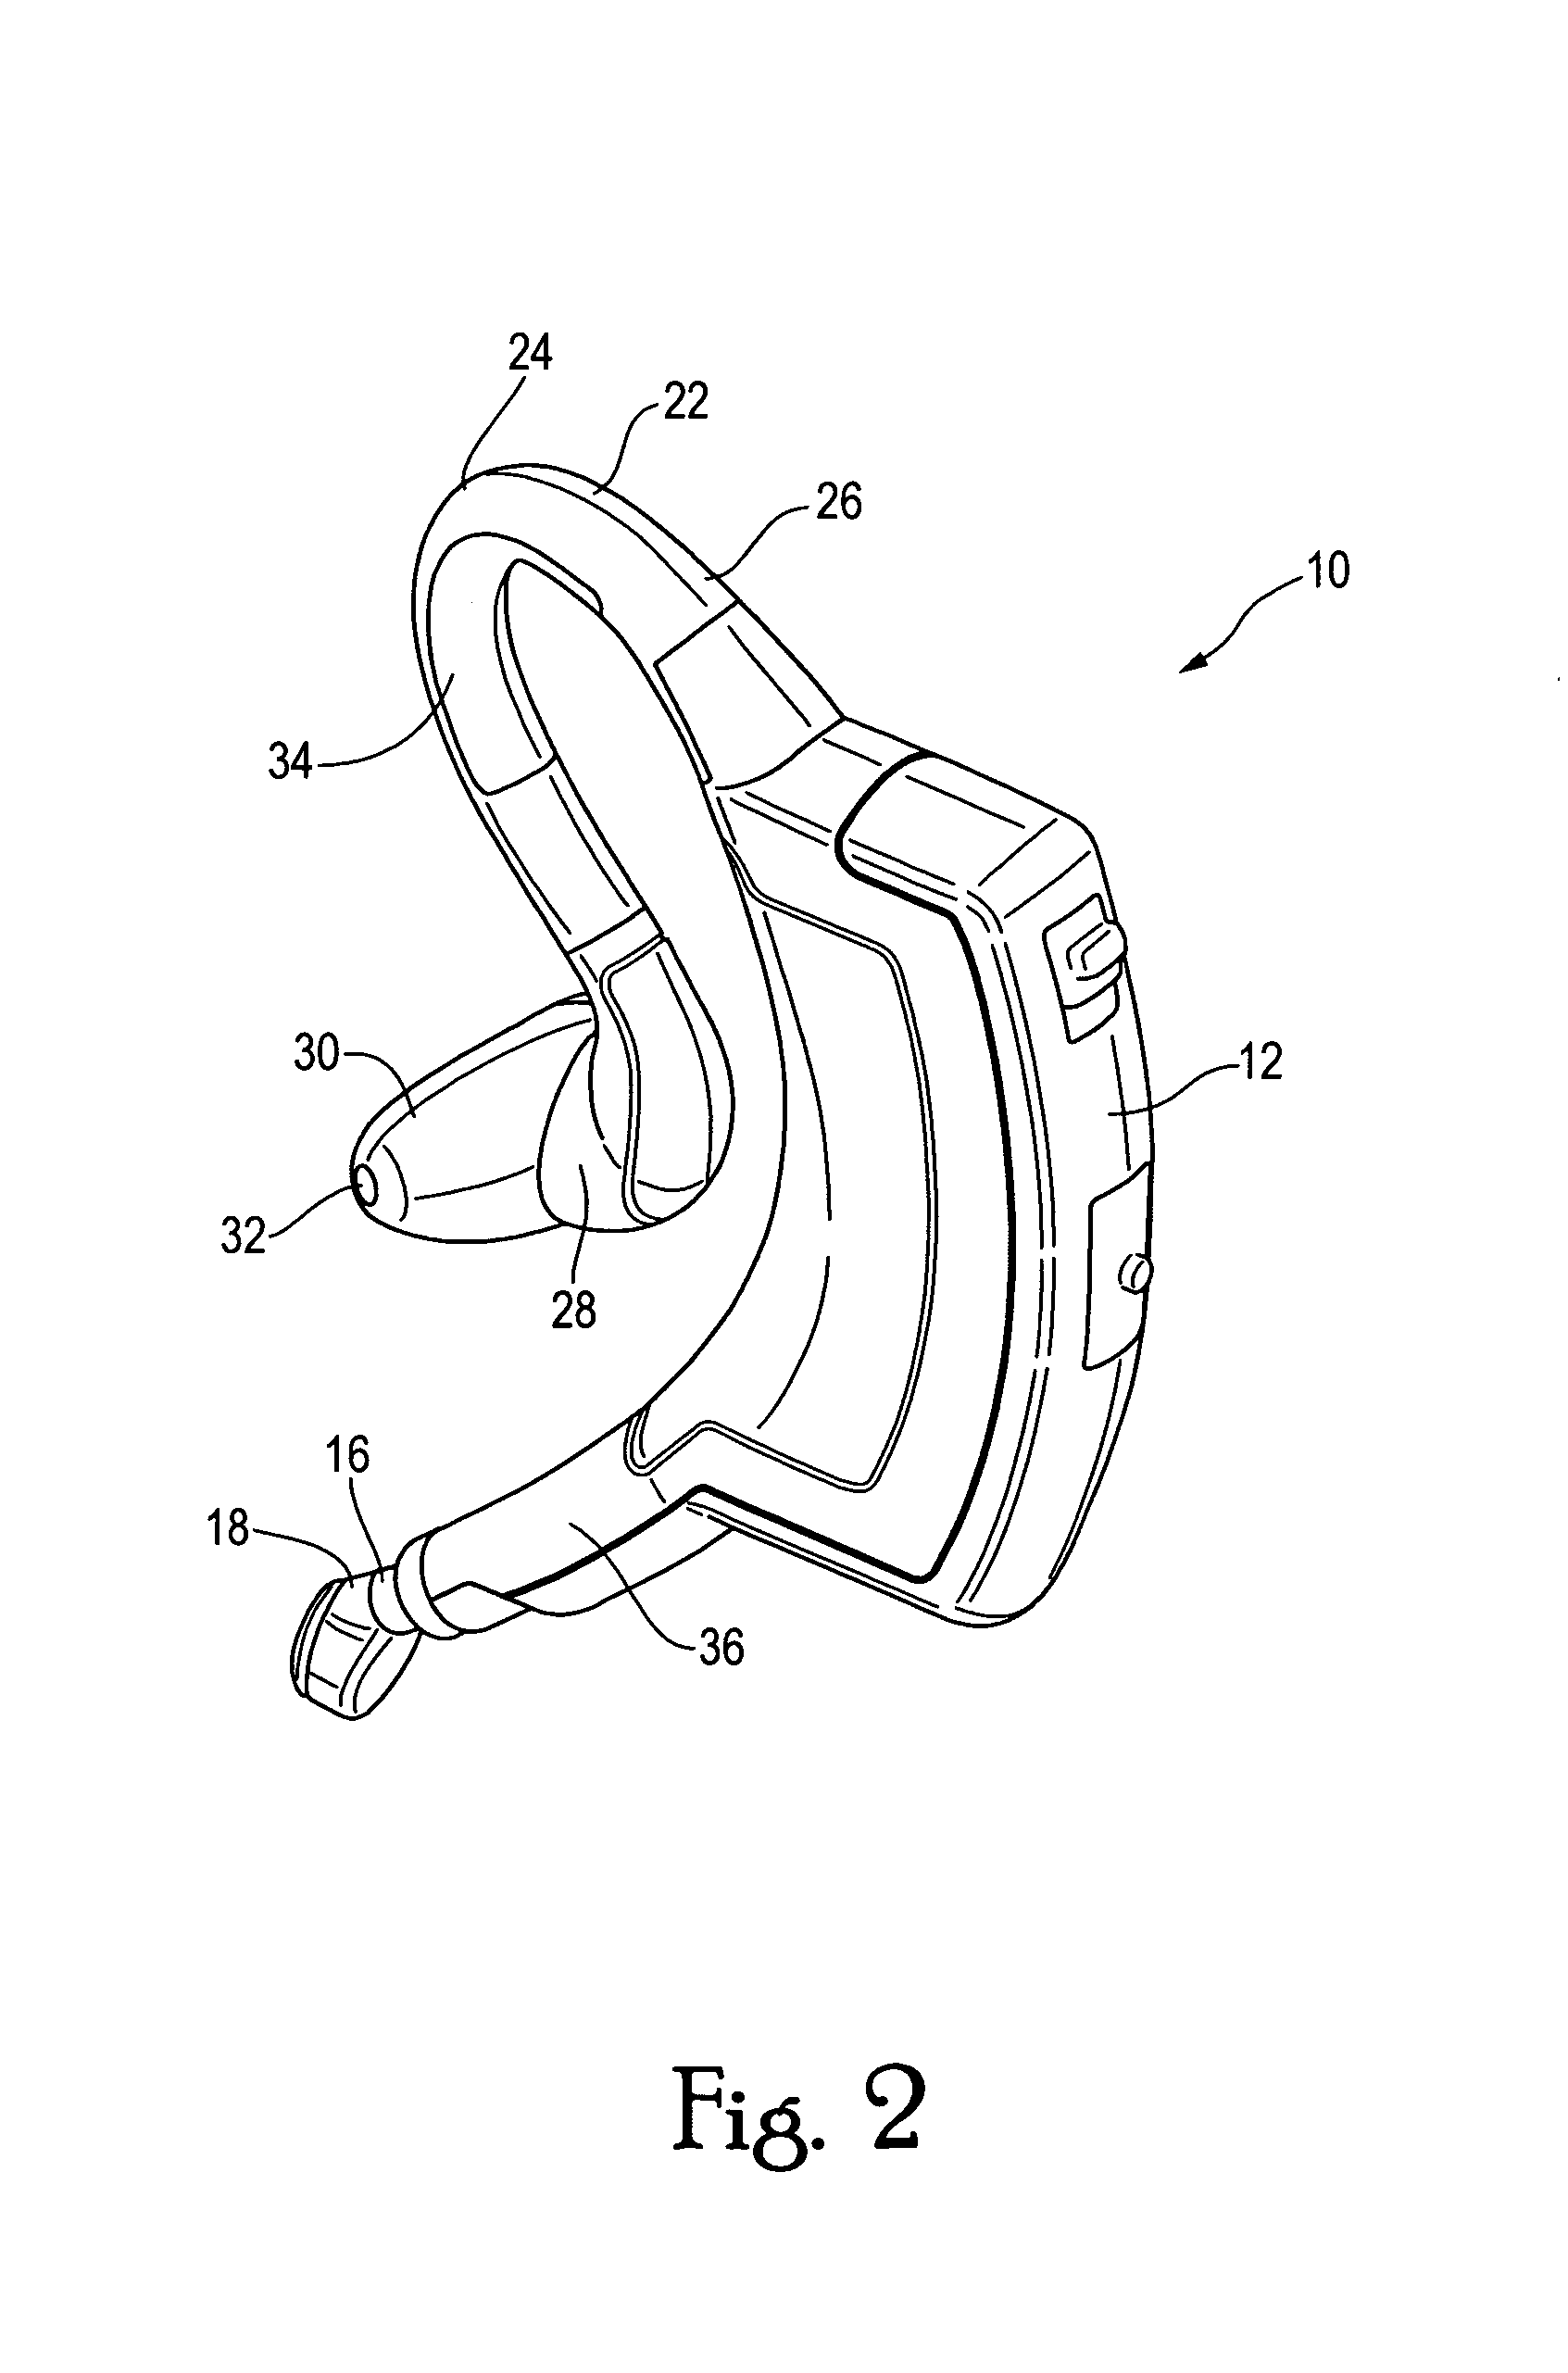 Headset with variable gain based on position of microphone boom